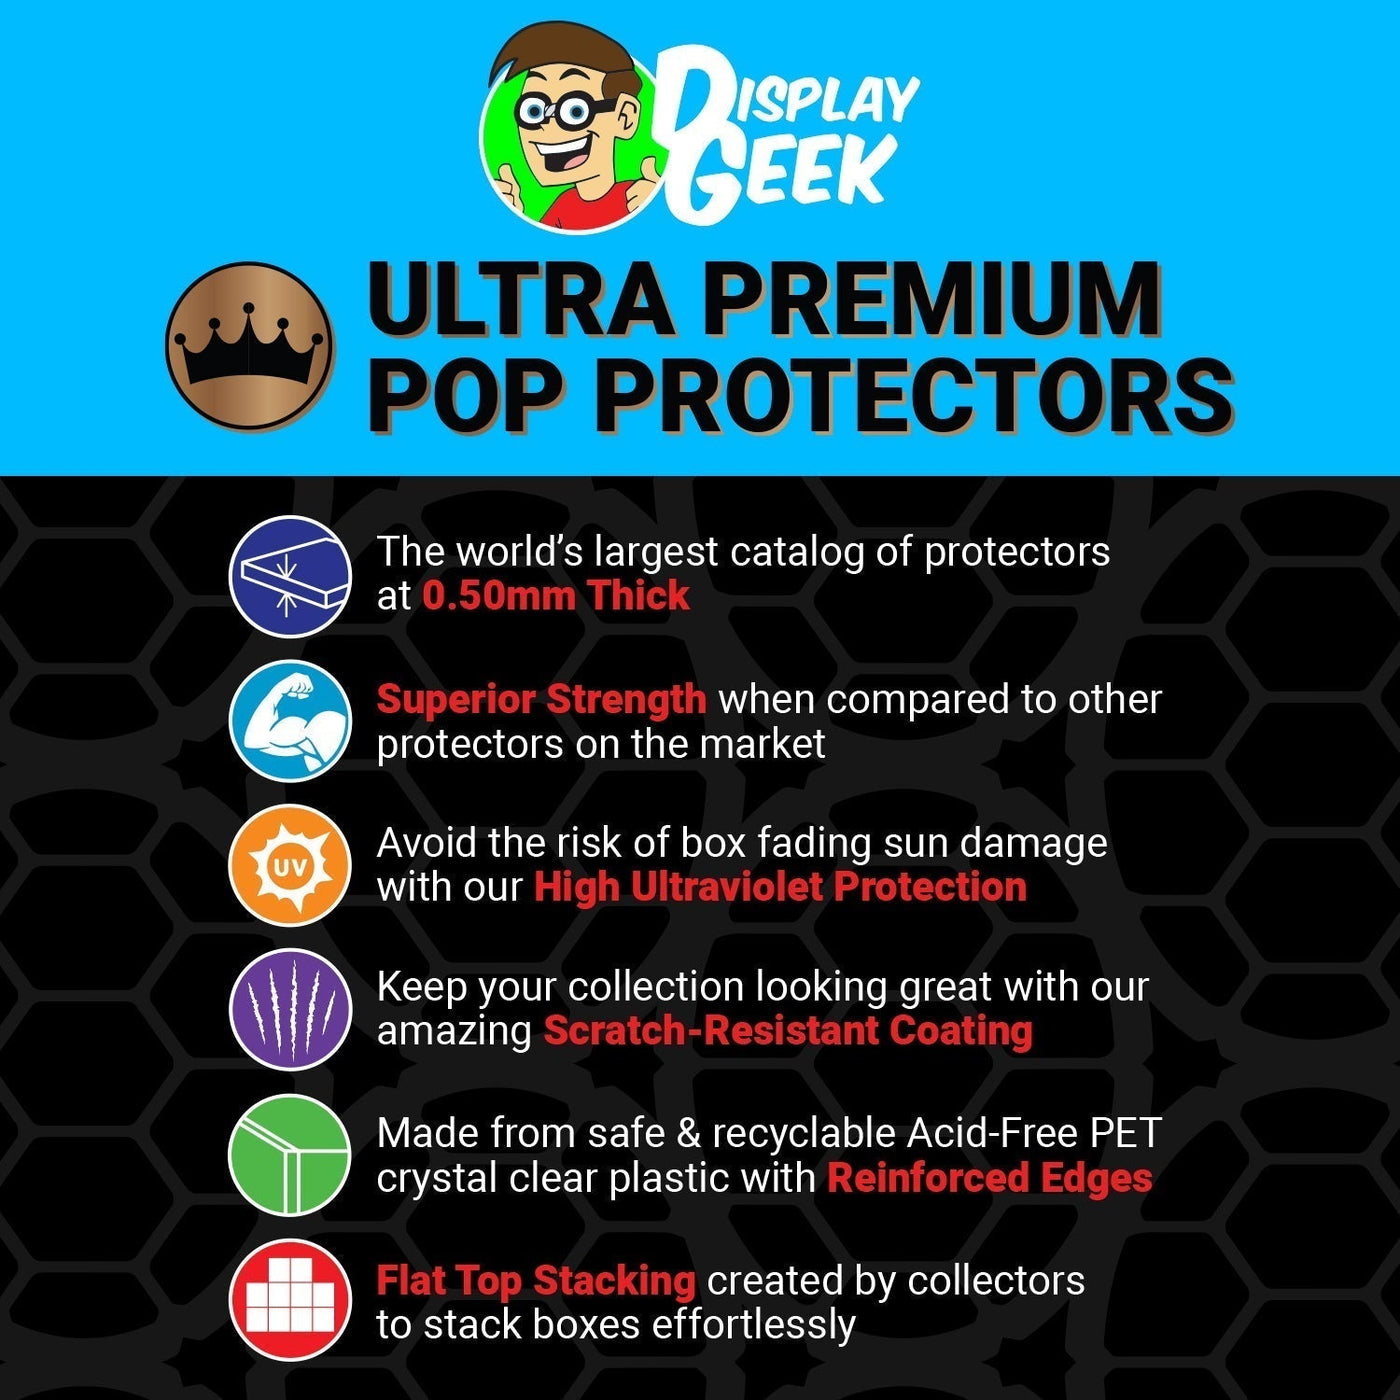 Pop Protector for Cthulhu FunkO's Cereal Box on The Protector Guide App by Display Geek